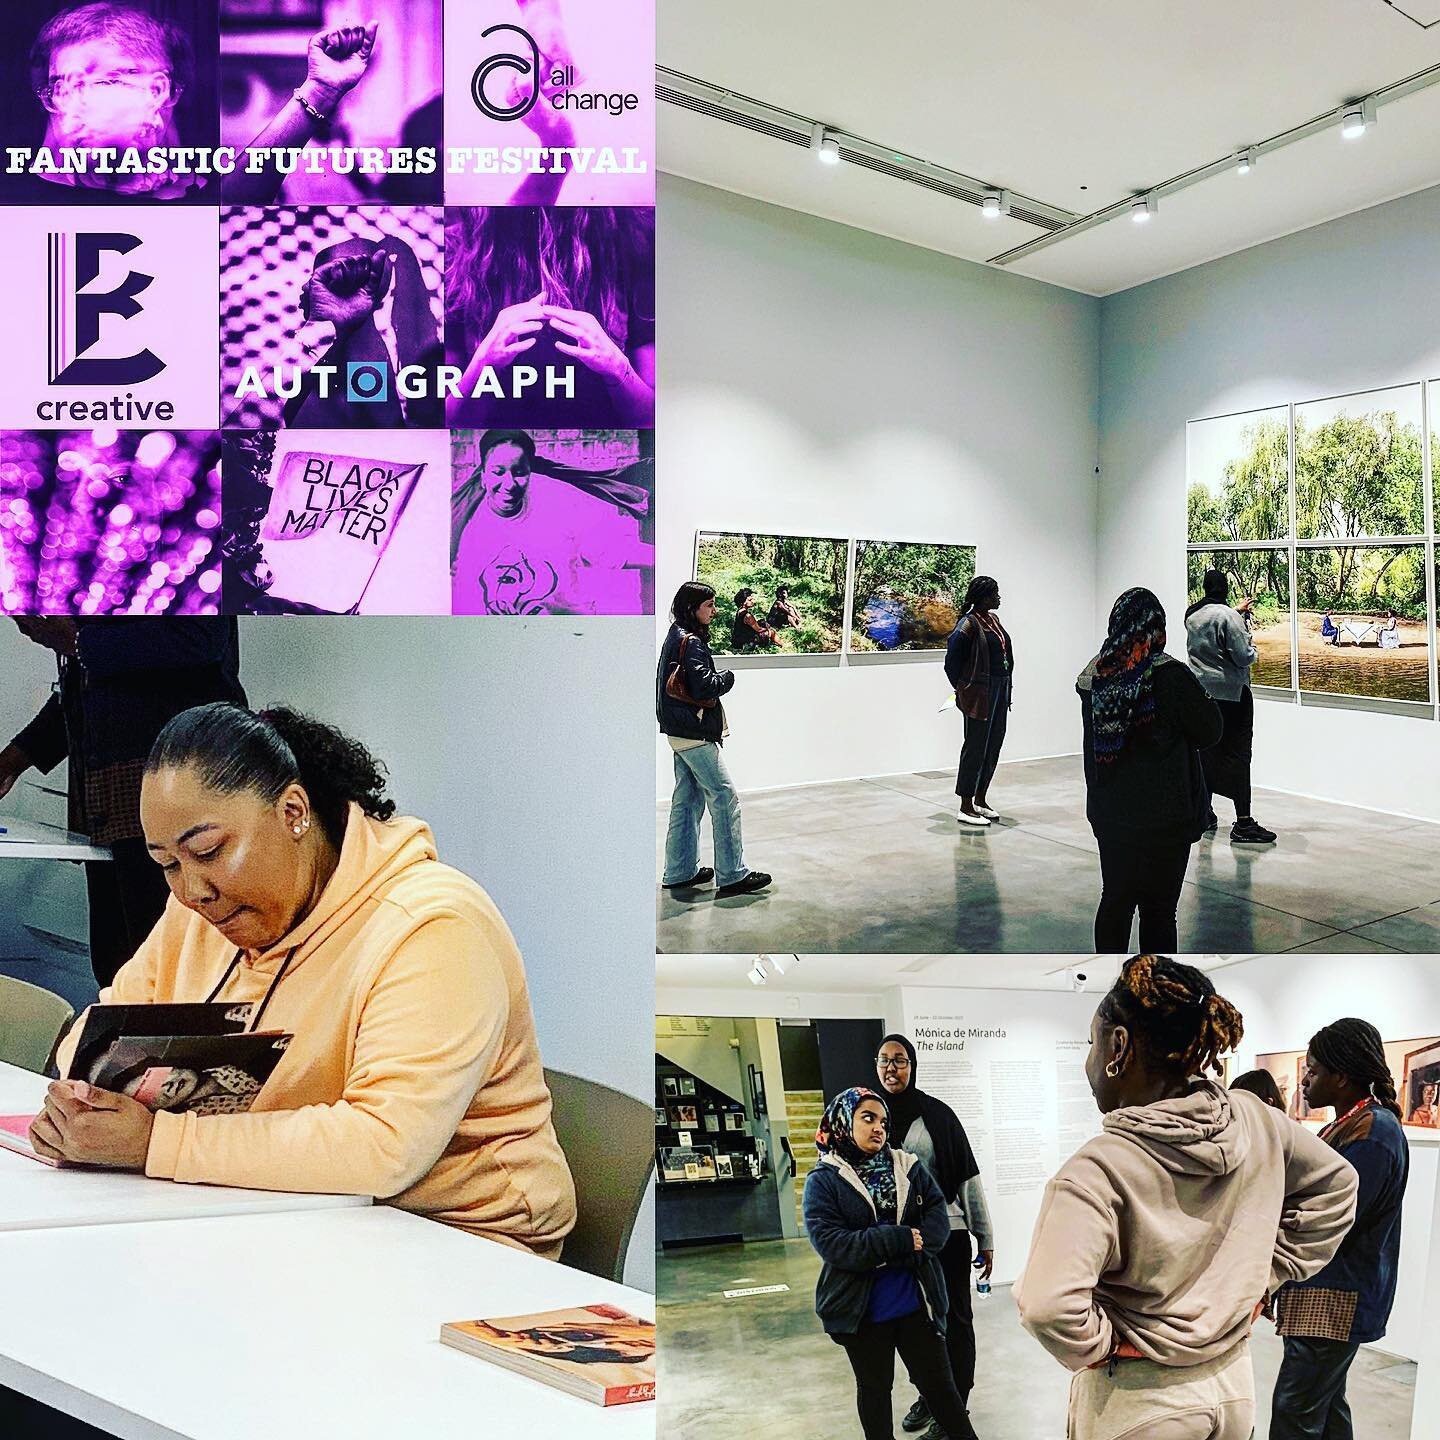 As part of our #FantasticFuturesFestival our @bprojectlondon young women enjoyed a wonderful visit to Autograph gallery - with a creative introduction to their fascinating archive, a Q&amp;A with women who work for Autograph and a tour of The Island 